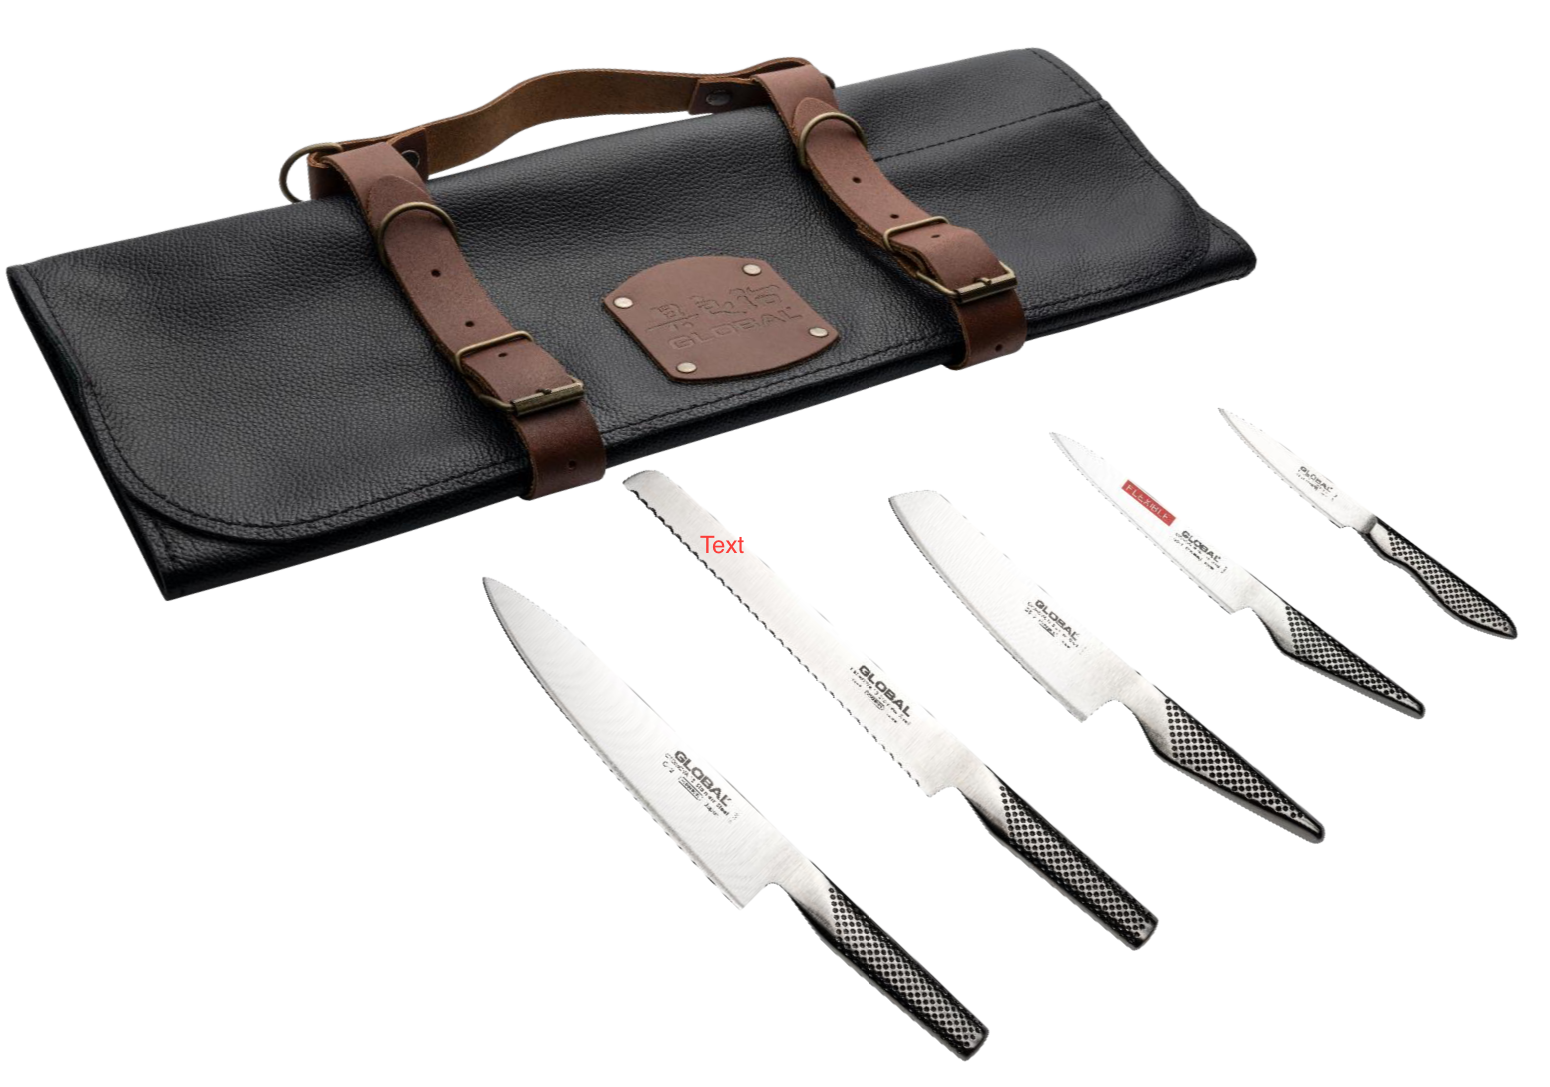 Global Global Limited Edition Knife Set with Real Leather Knife Case / Wrap